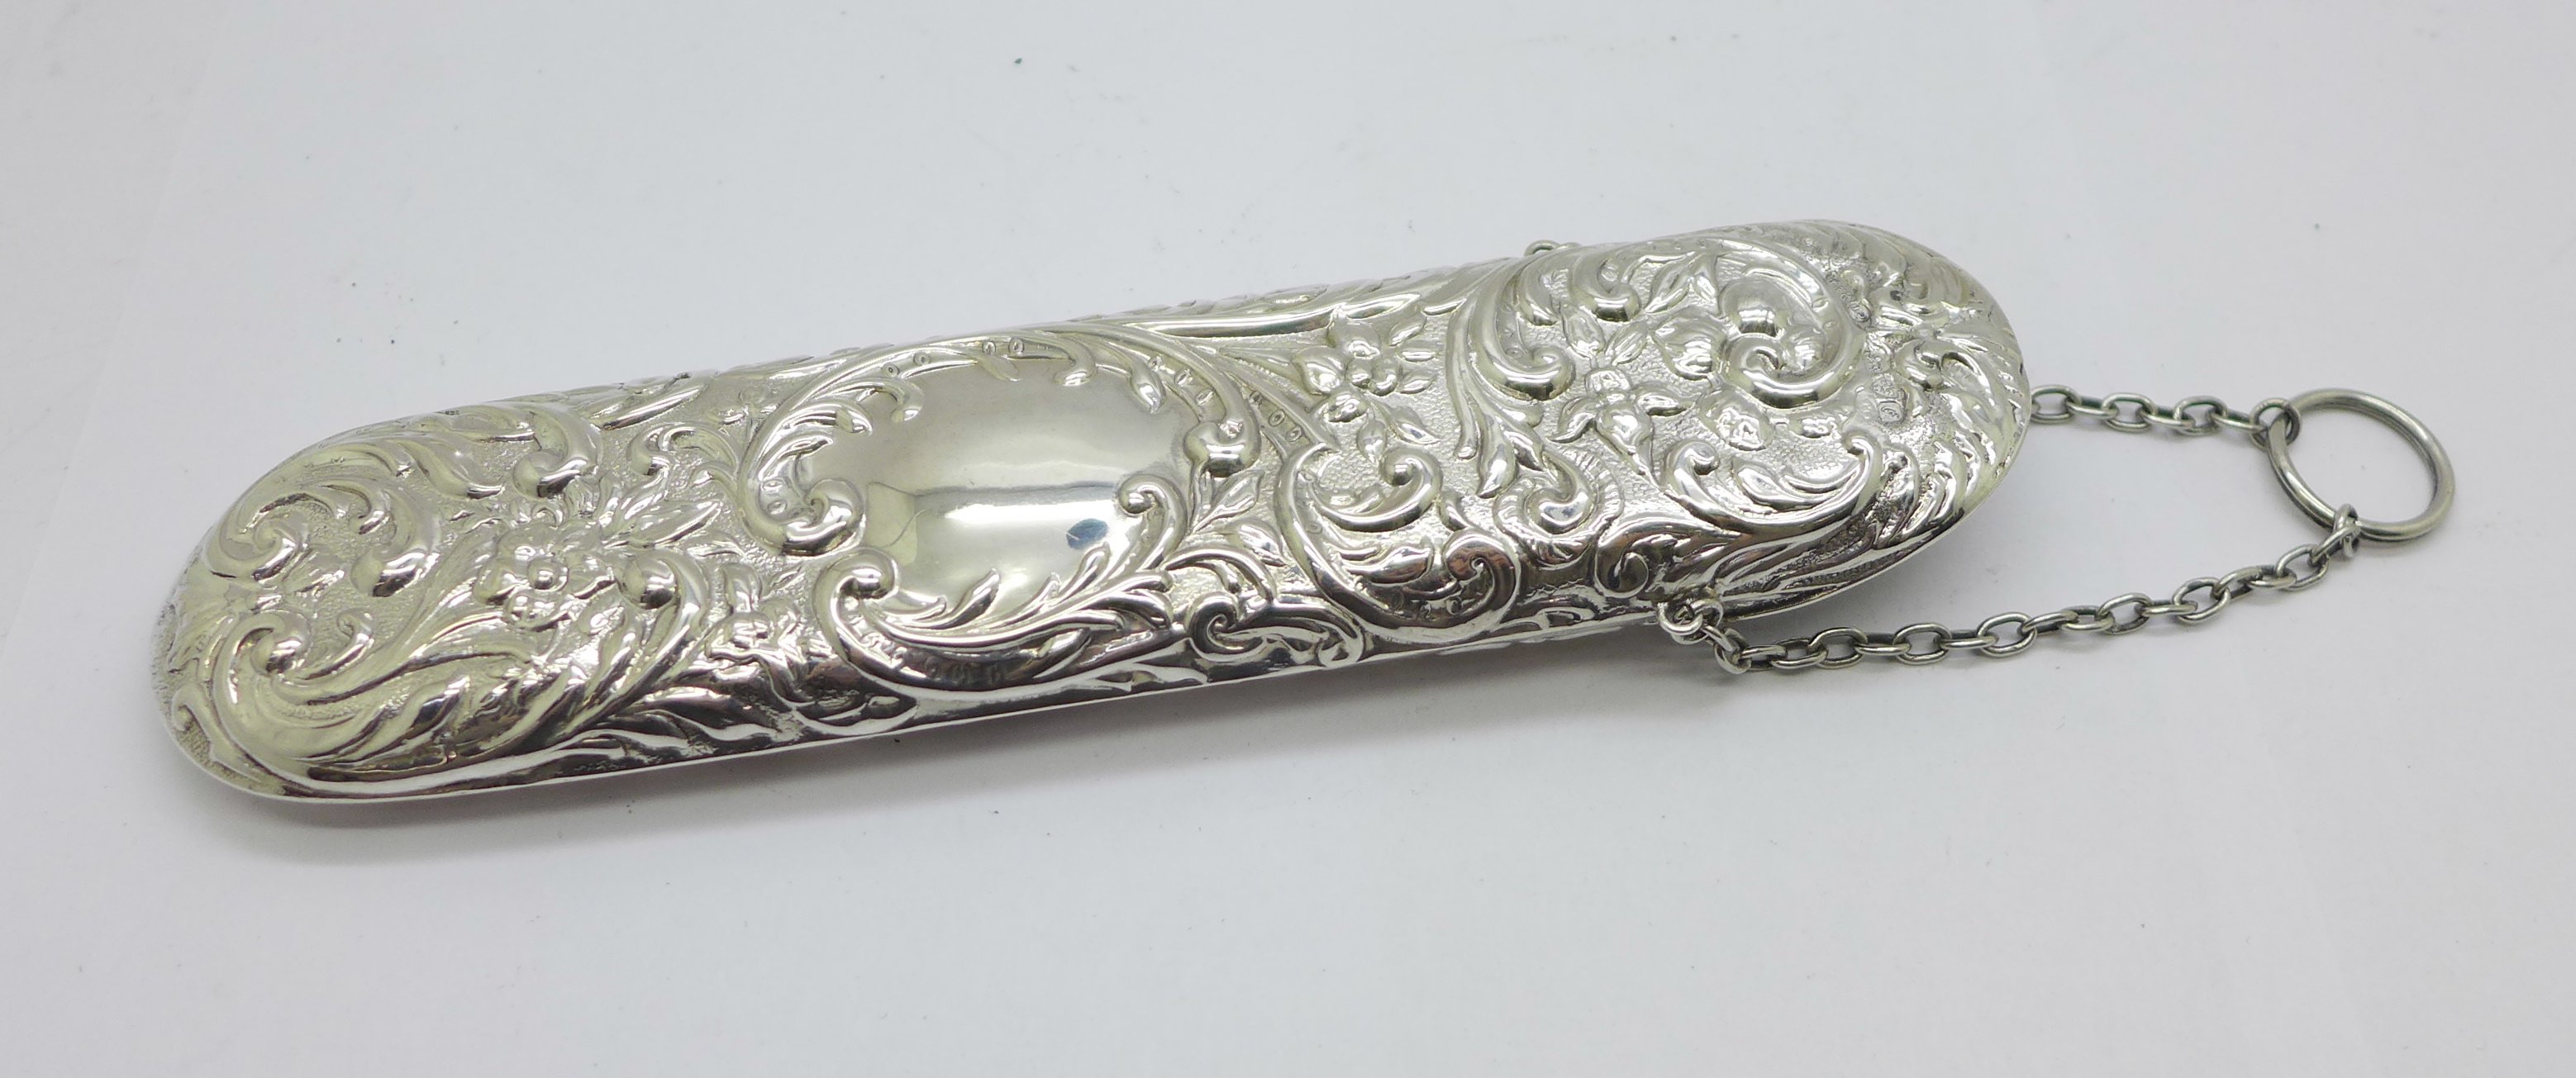 An embossed silver spectacle case, Chester 1914 - Image 2 of 2